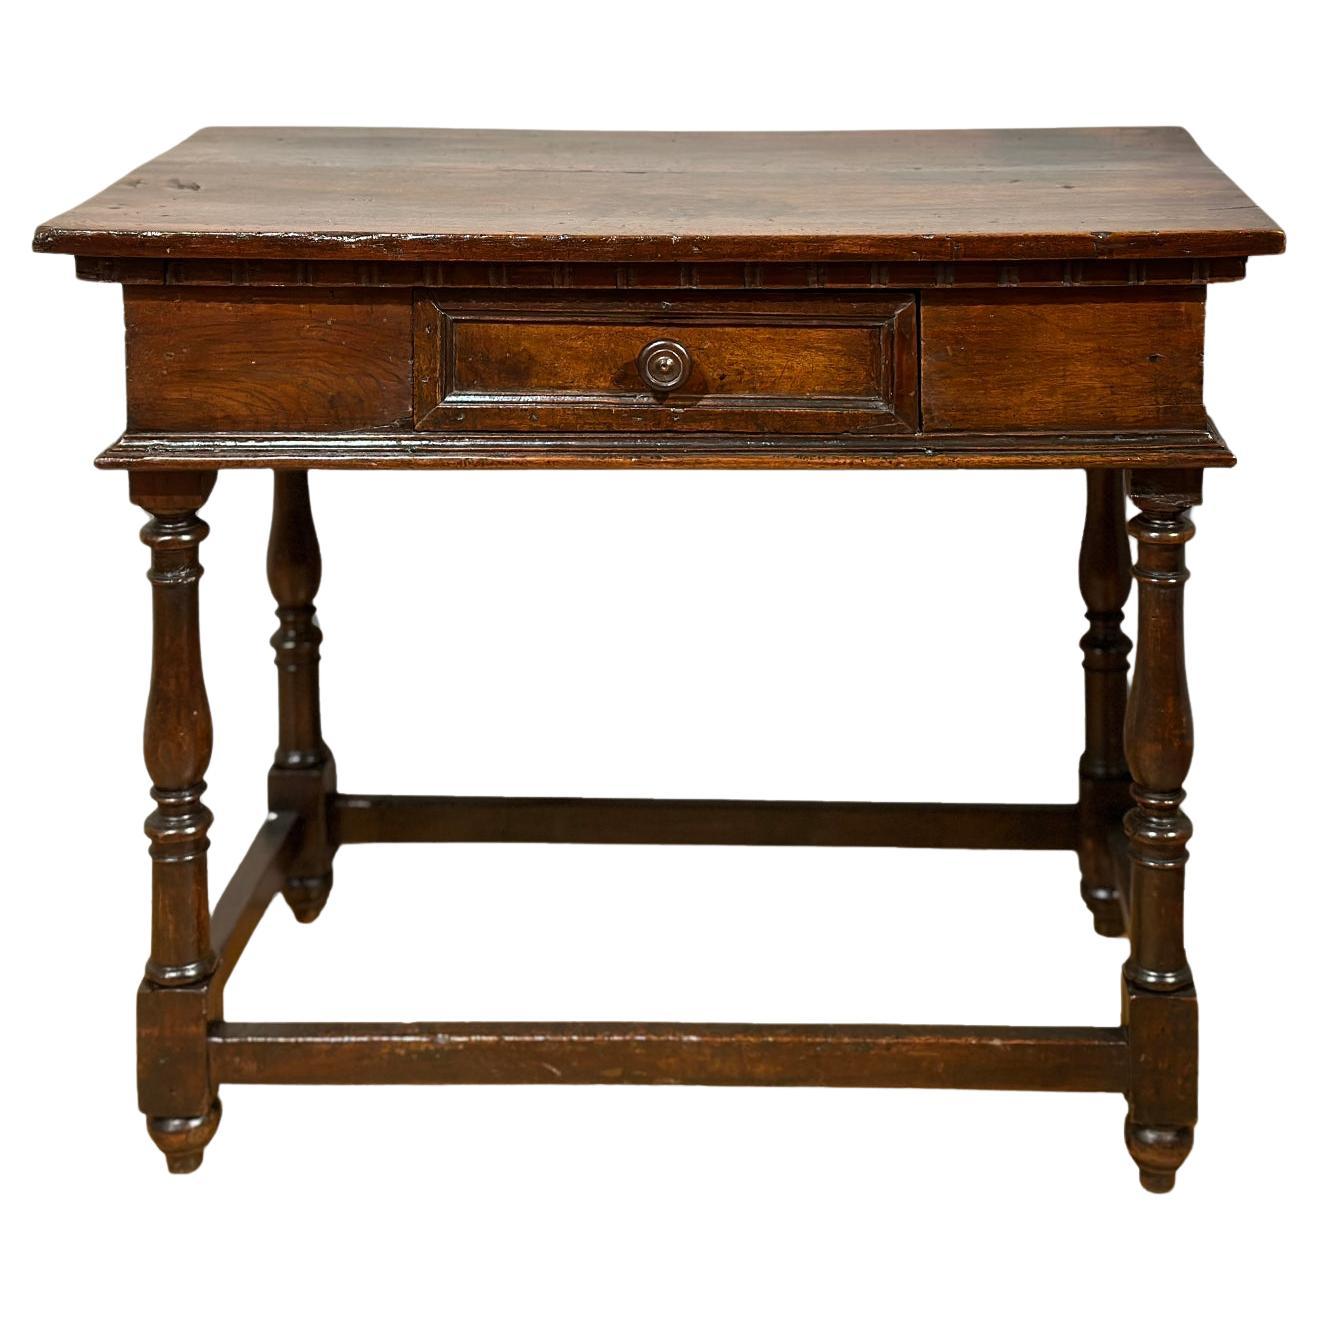 END OF THE 16th CENTURY LOUIS XIV TABLE WITH DRAWER